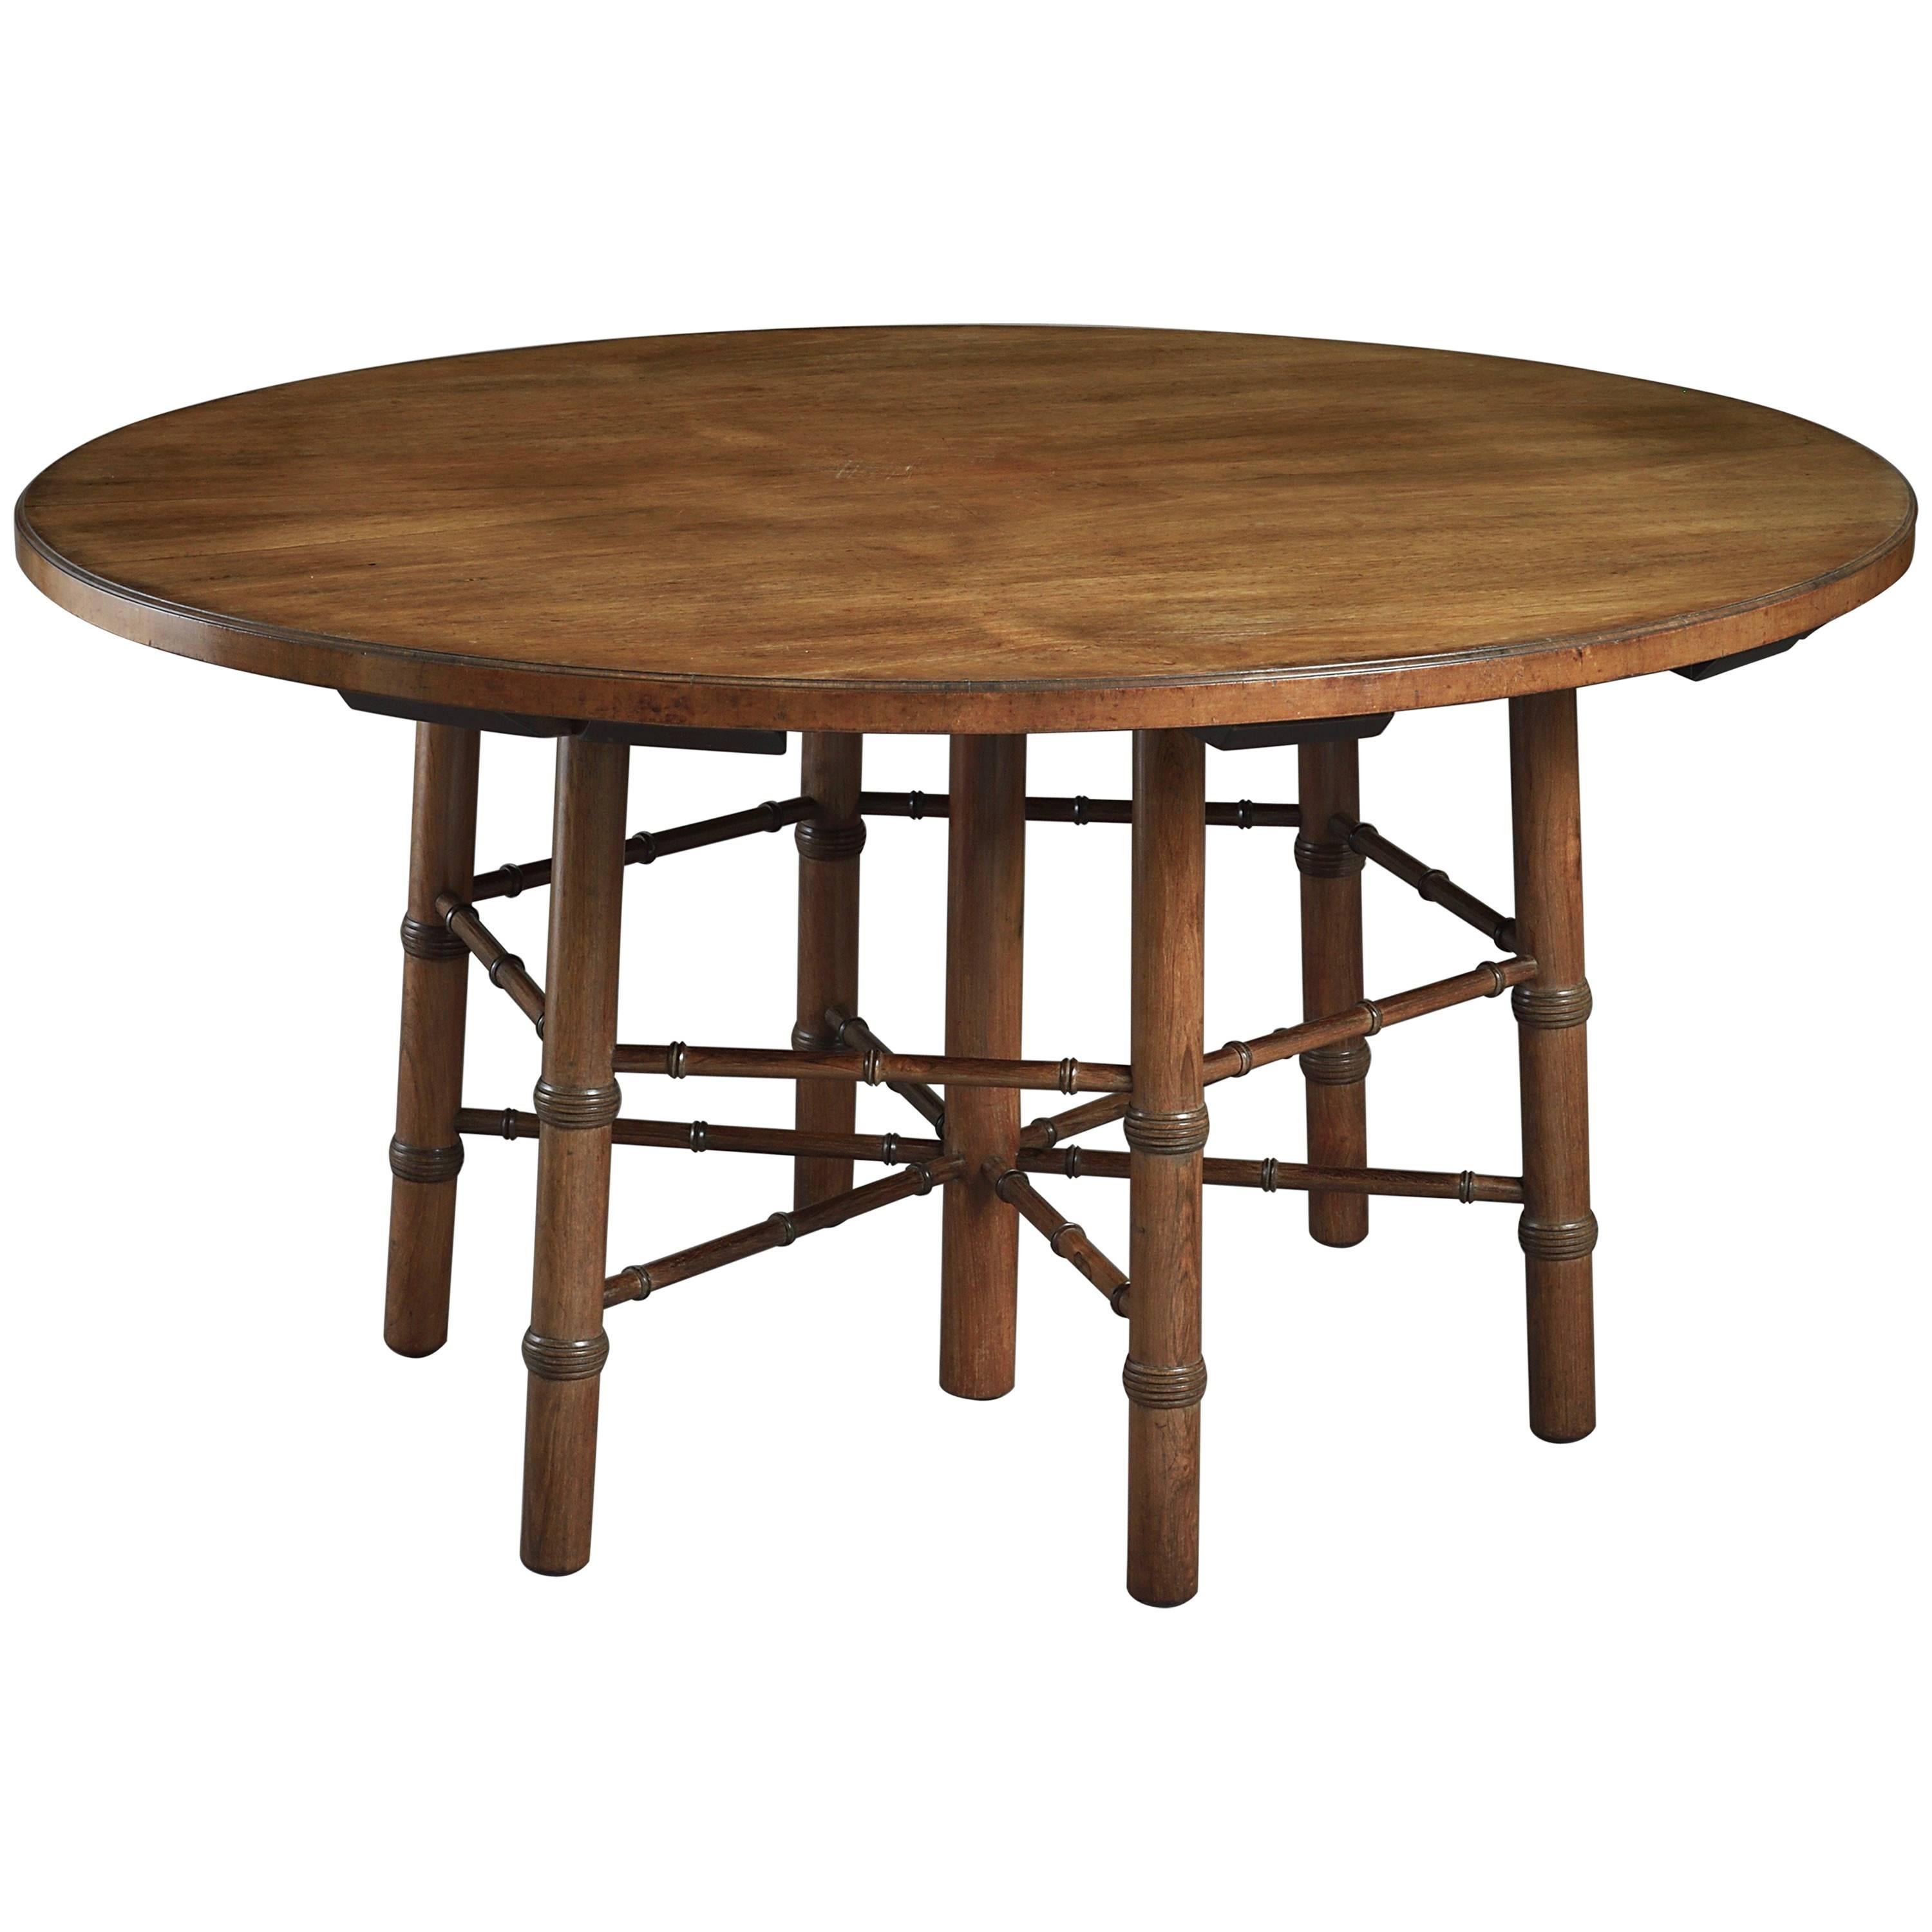 Rosewood Centre Table Designed by Philip Webb